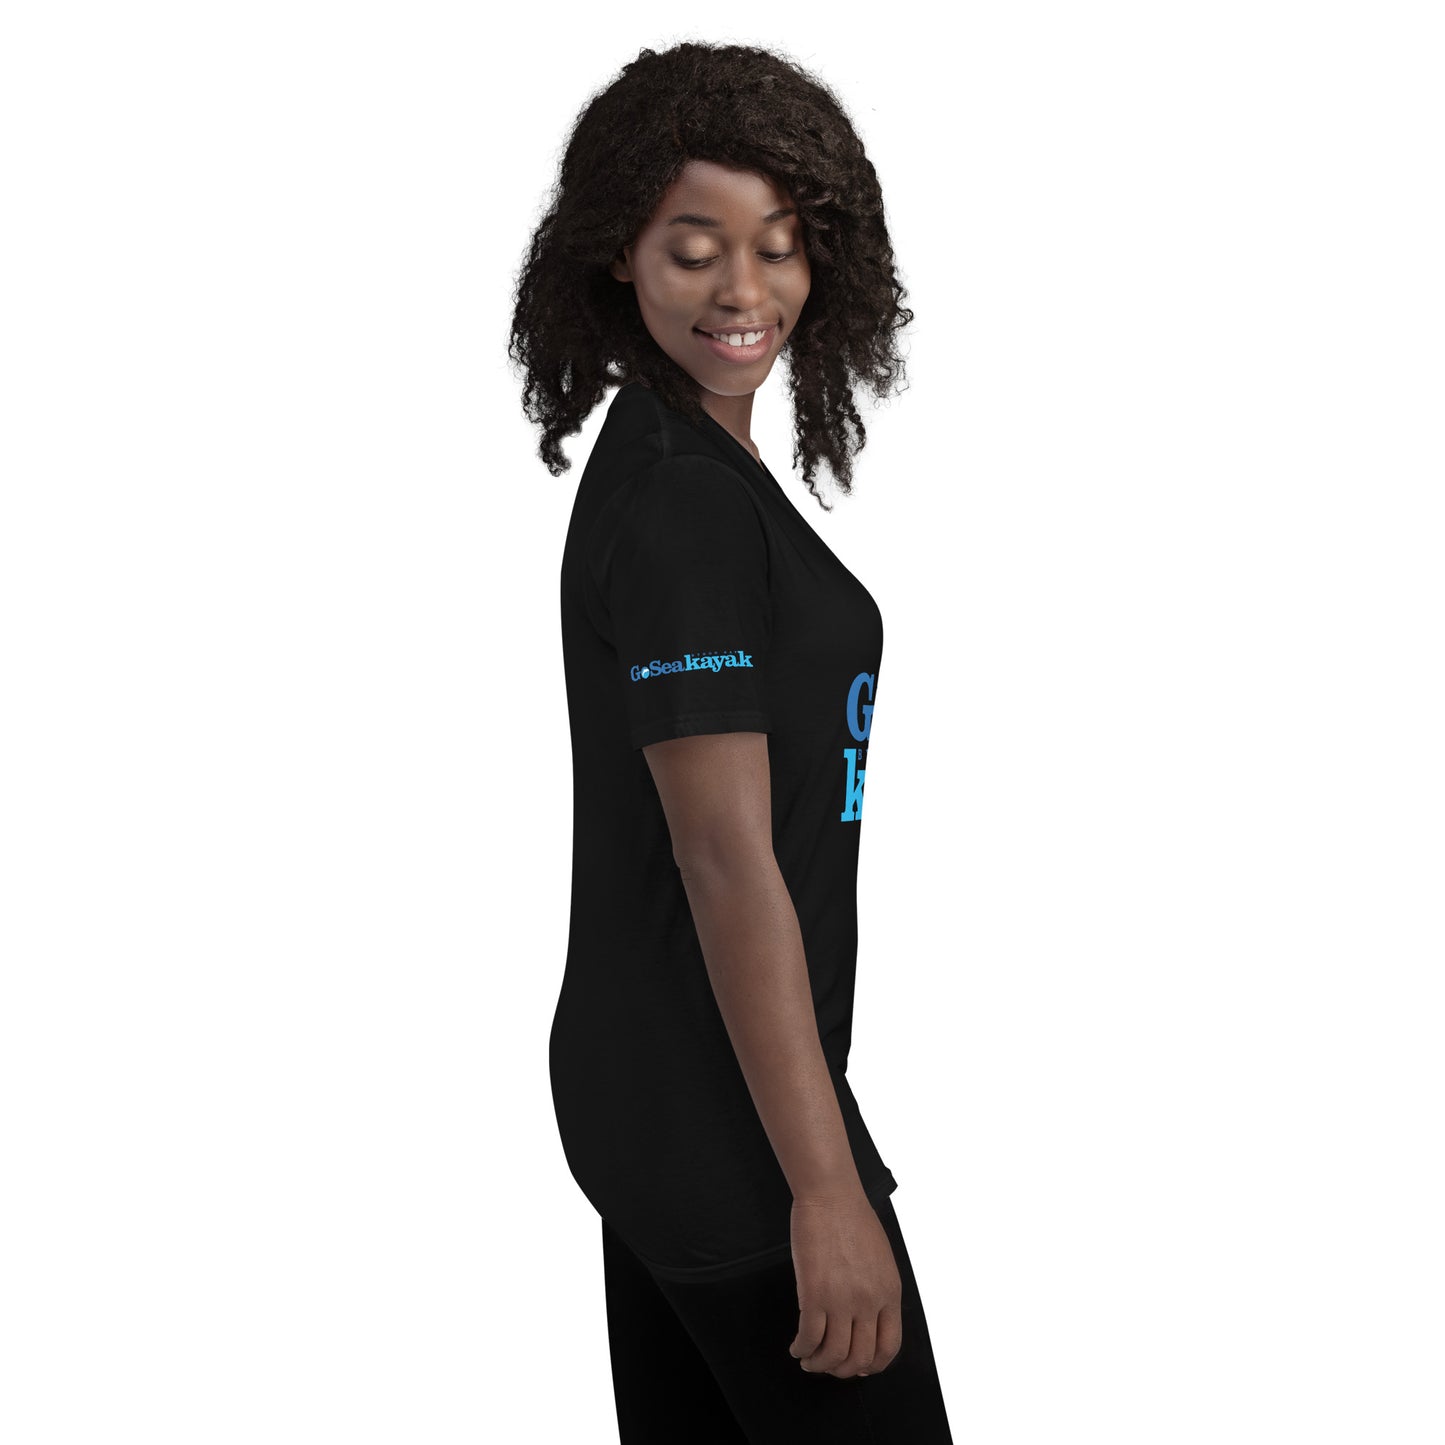  Unisex short sleeve T-shirt - Black - Side view on woman - With Go Sea Kayak logo on front and right sleve - Genuine Go Sea Kayak Byron Bay Merchandise 